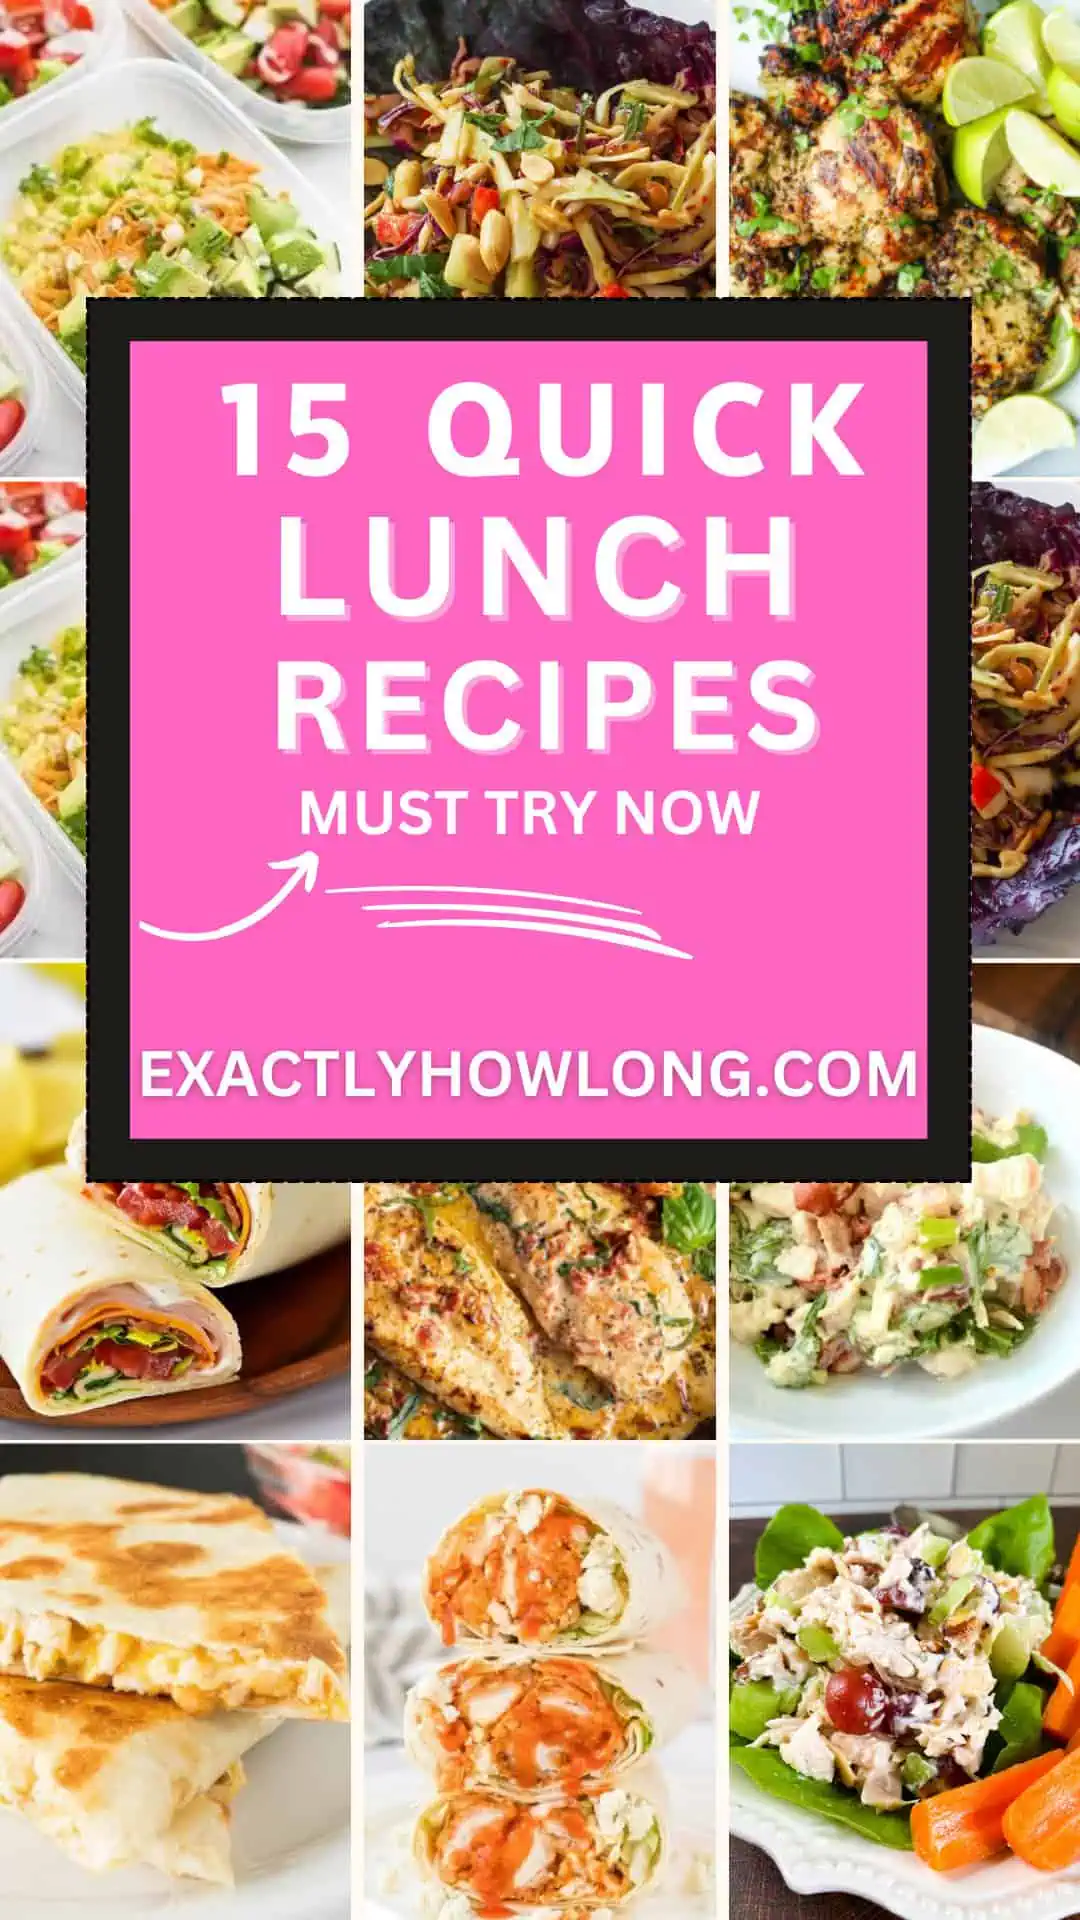 Healthy lunch recipes that are quick and easy for both work and family meals.